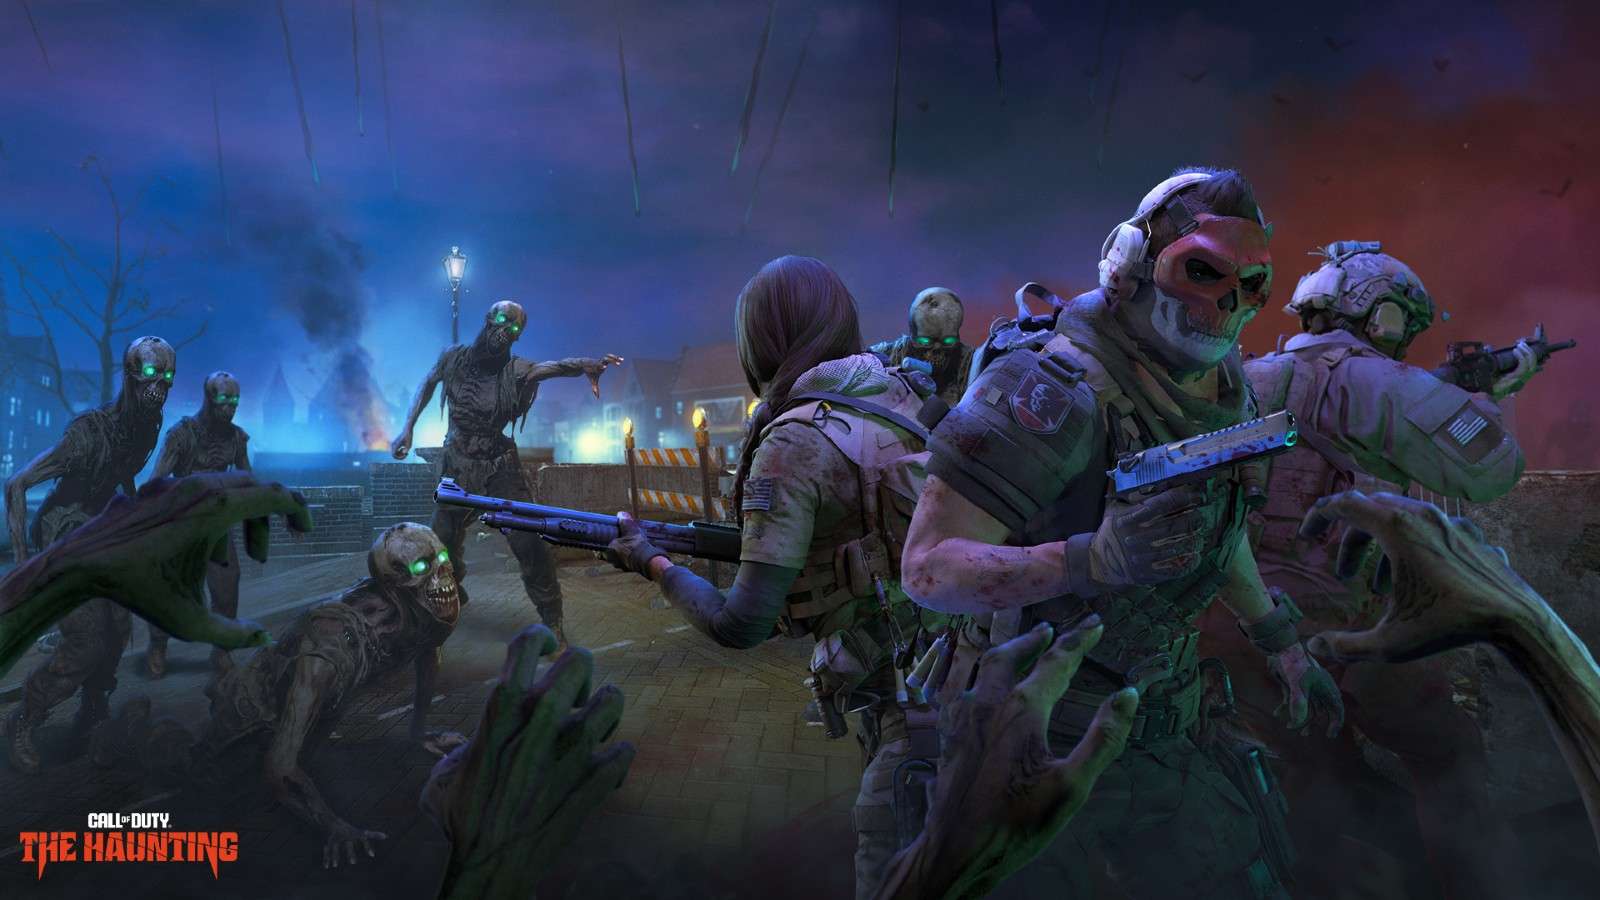 The Haunting event zombies